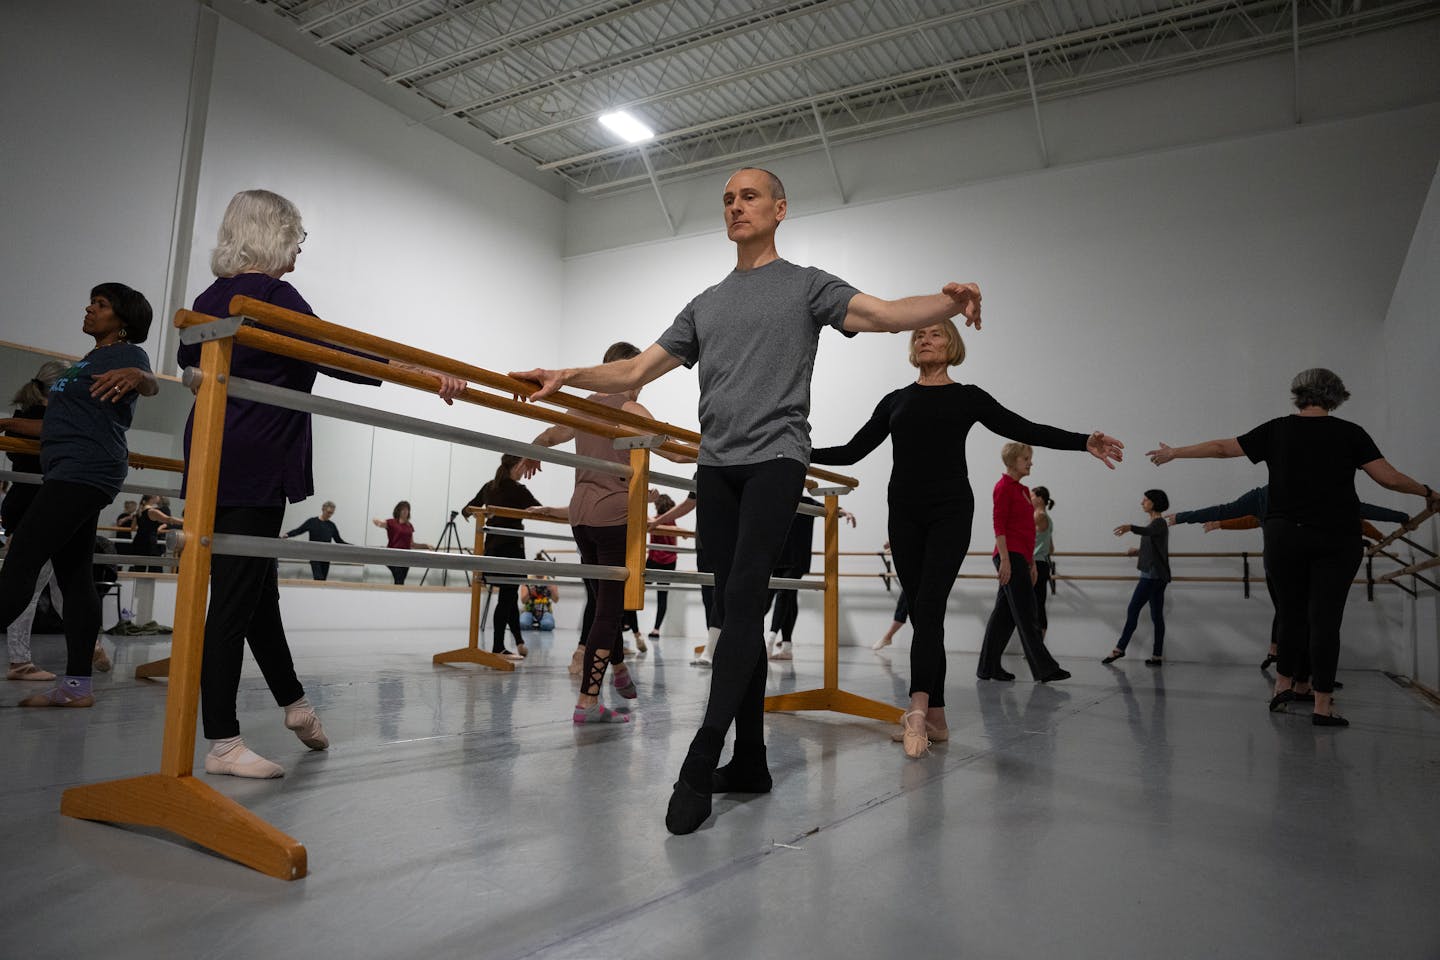 An exercise class for older adults